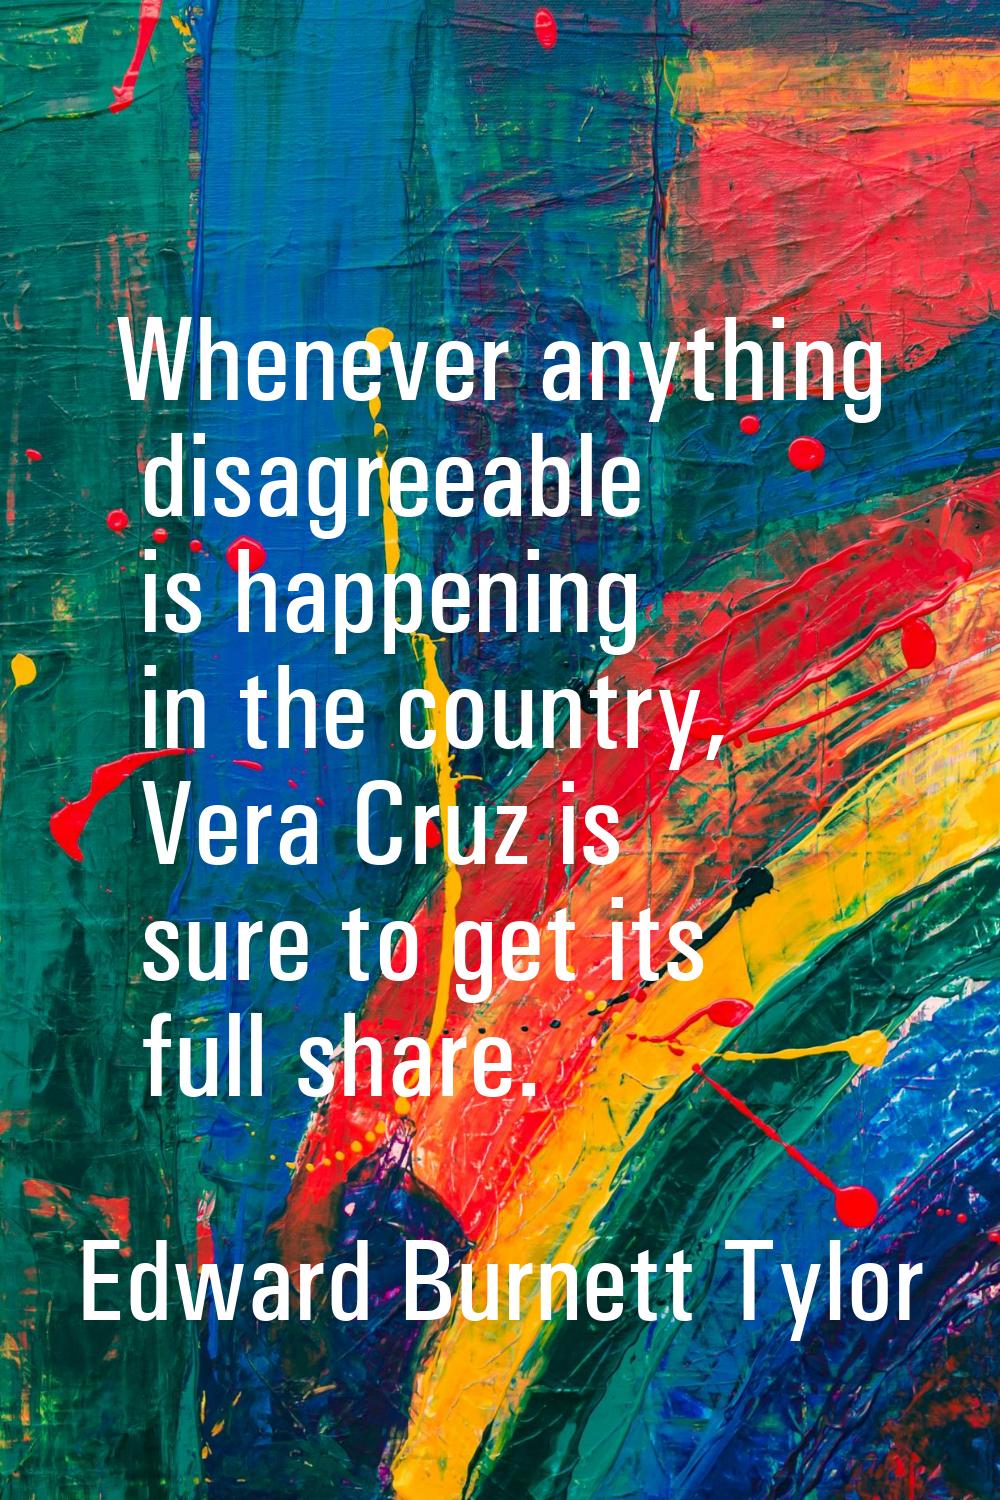 Whenever anything disagreeable is happening in the country, Vera Cruz is sure to get its full share